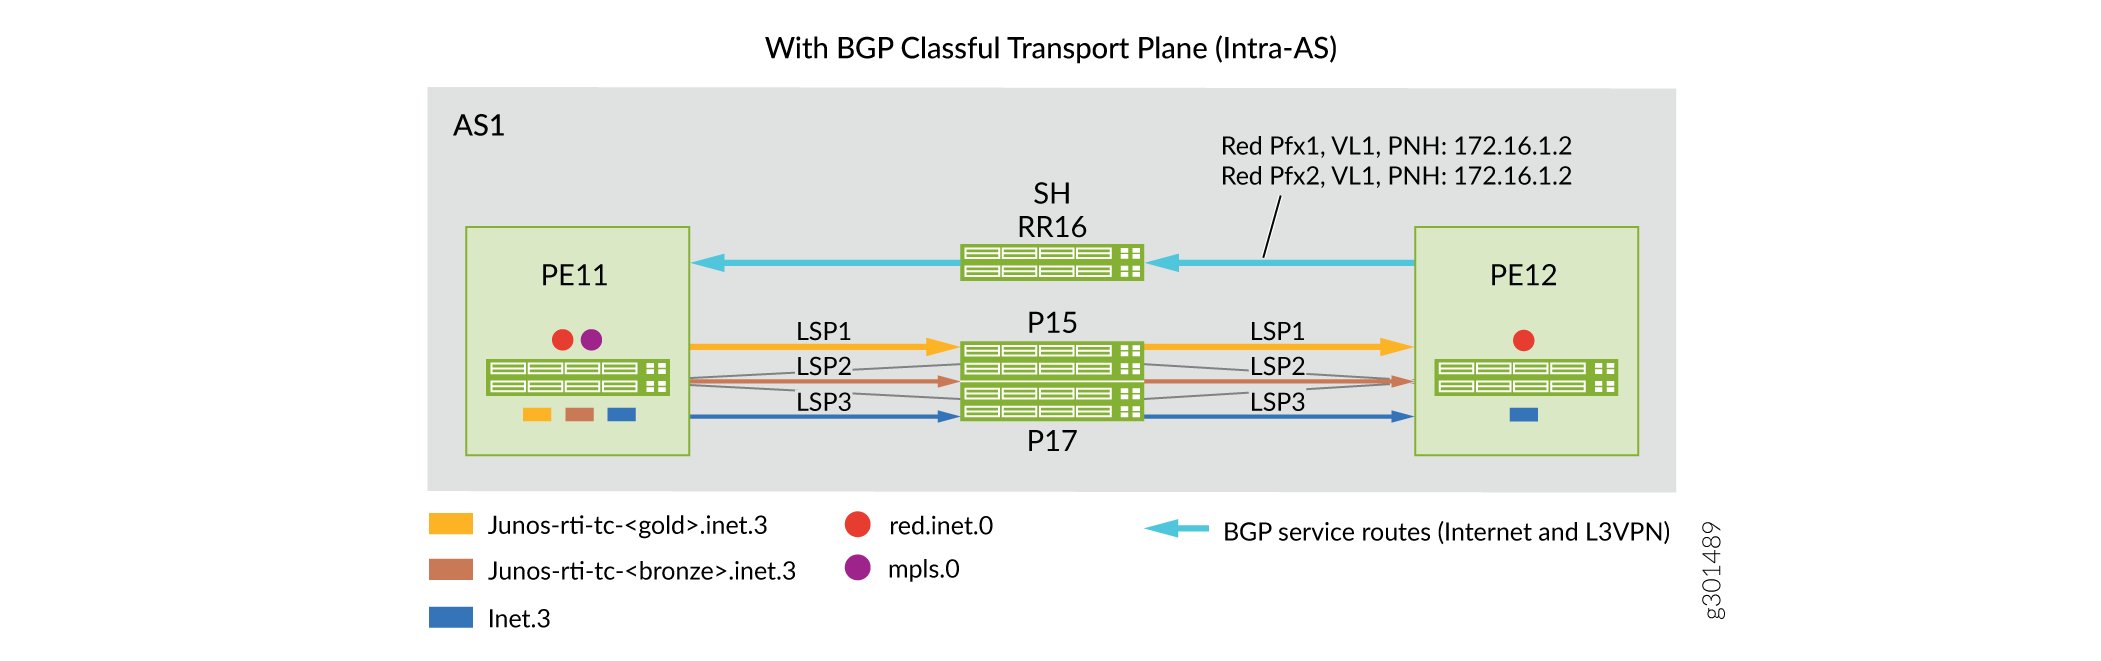 Intra-AS Domain: Before-and-After Scenarios For BGP Classful Transport Planes Implementation